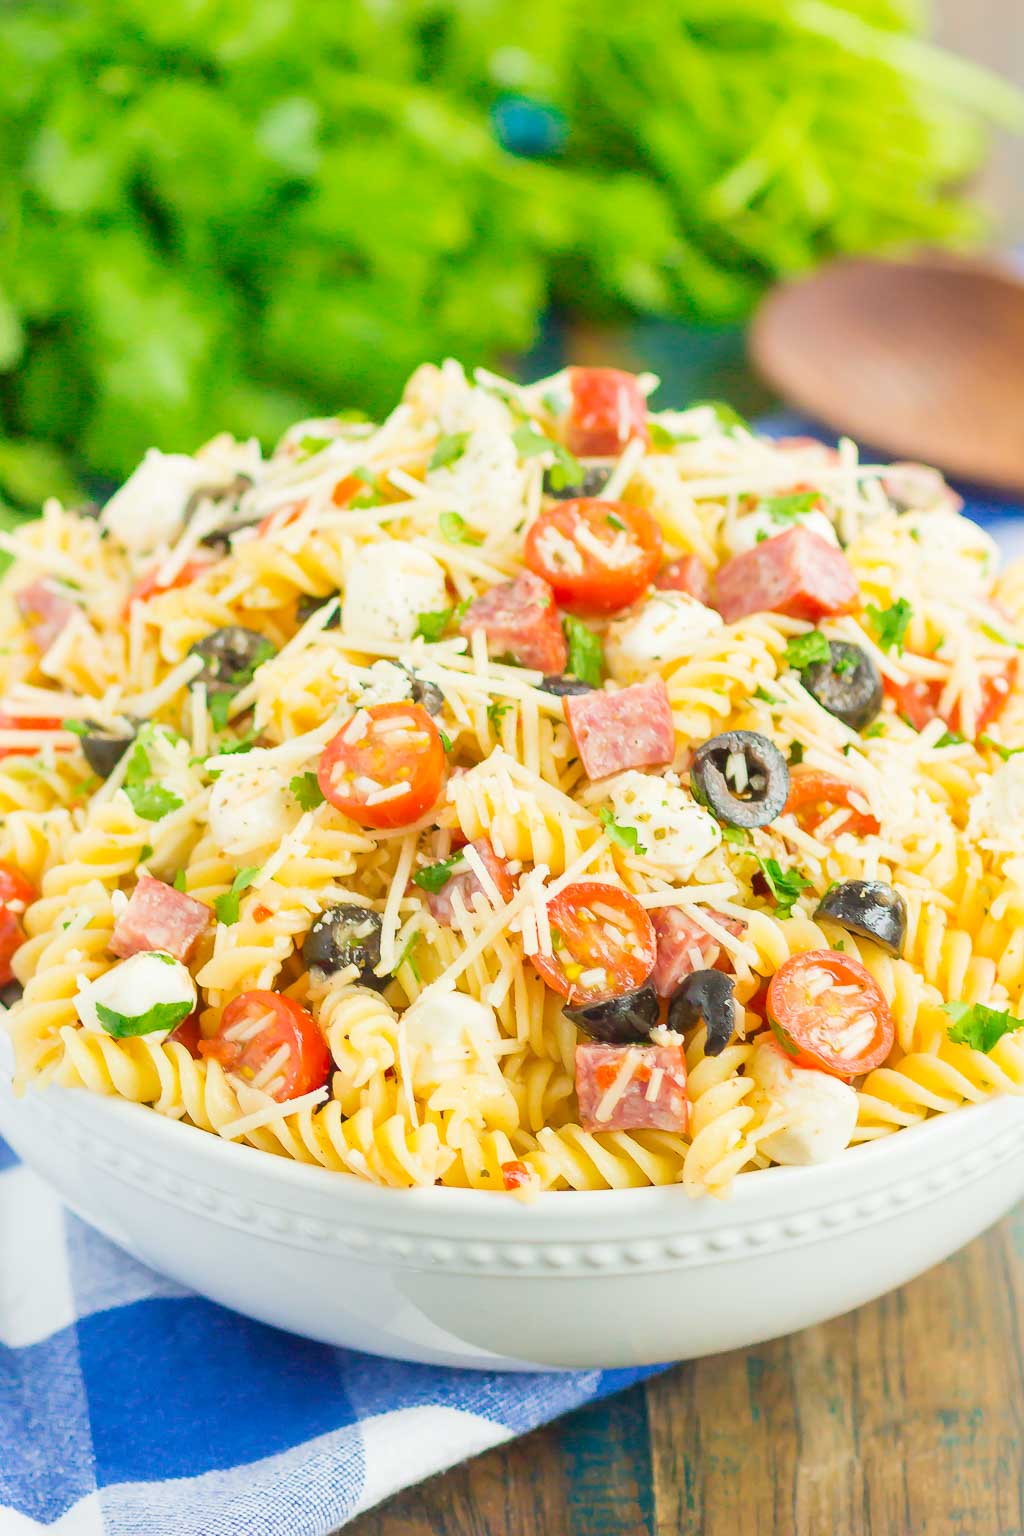 Easy Italian Pasta Salad is fast, fresh, and loaded with flavor. This zesty salad is packed with classic favorites, like salami, mozzarella pearls, black olives, cherry tomatoes and then tossed in a simple Italian dressing. Easy to make and ready in less than 30 minutes, this salad is perfect to serve for those summer parties and get-togethers! #pastasalad #italianpastasalad